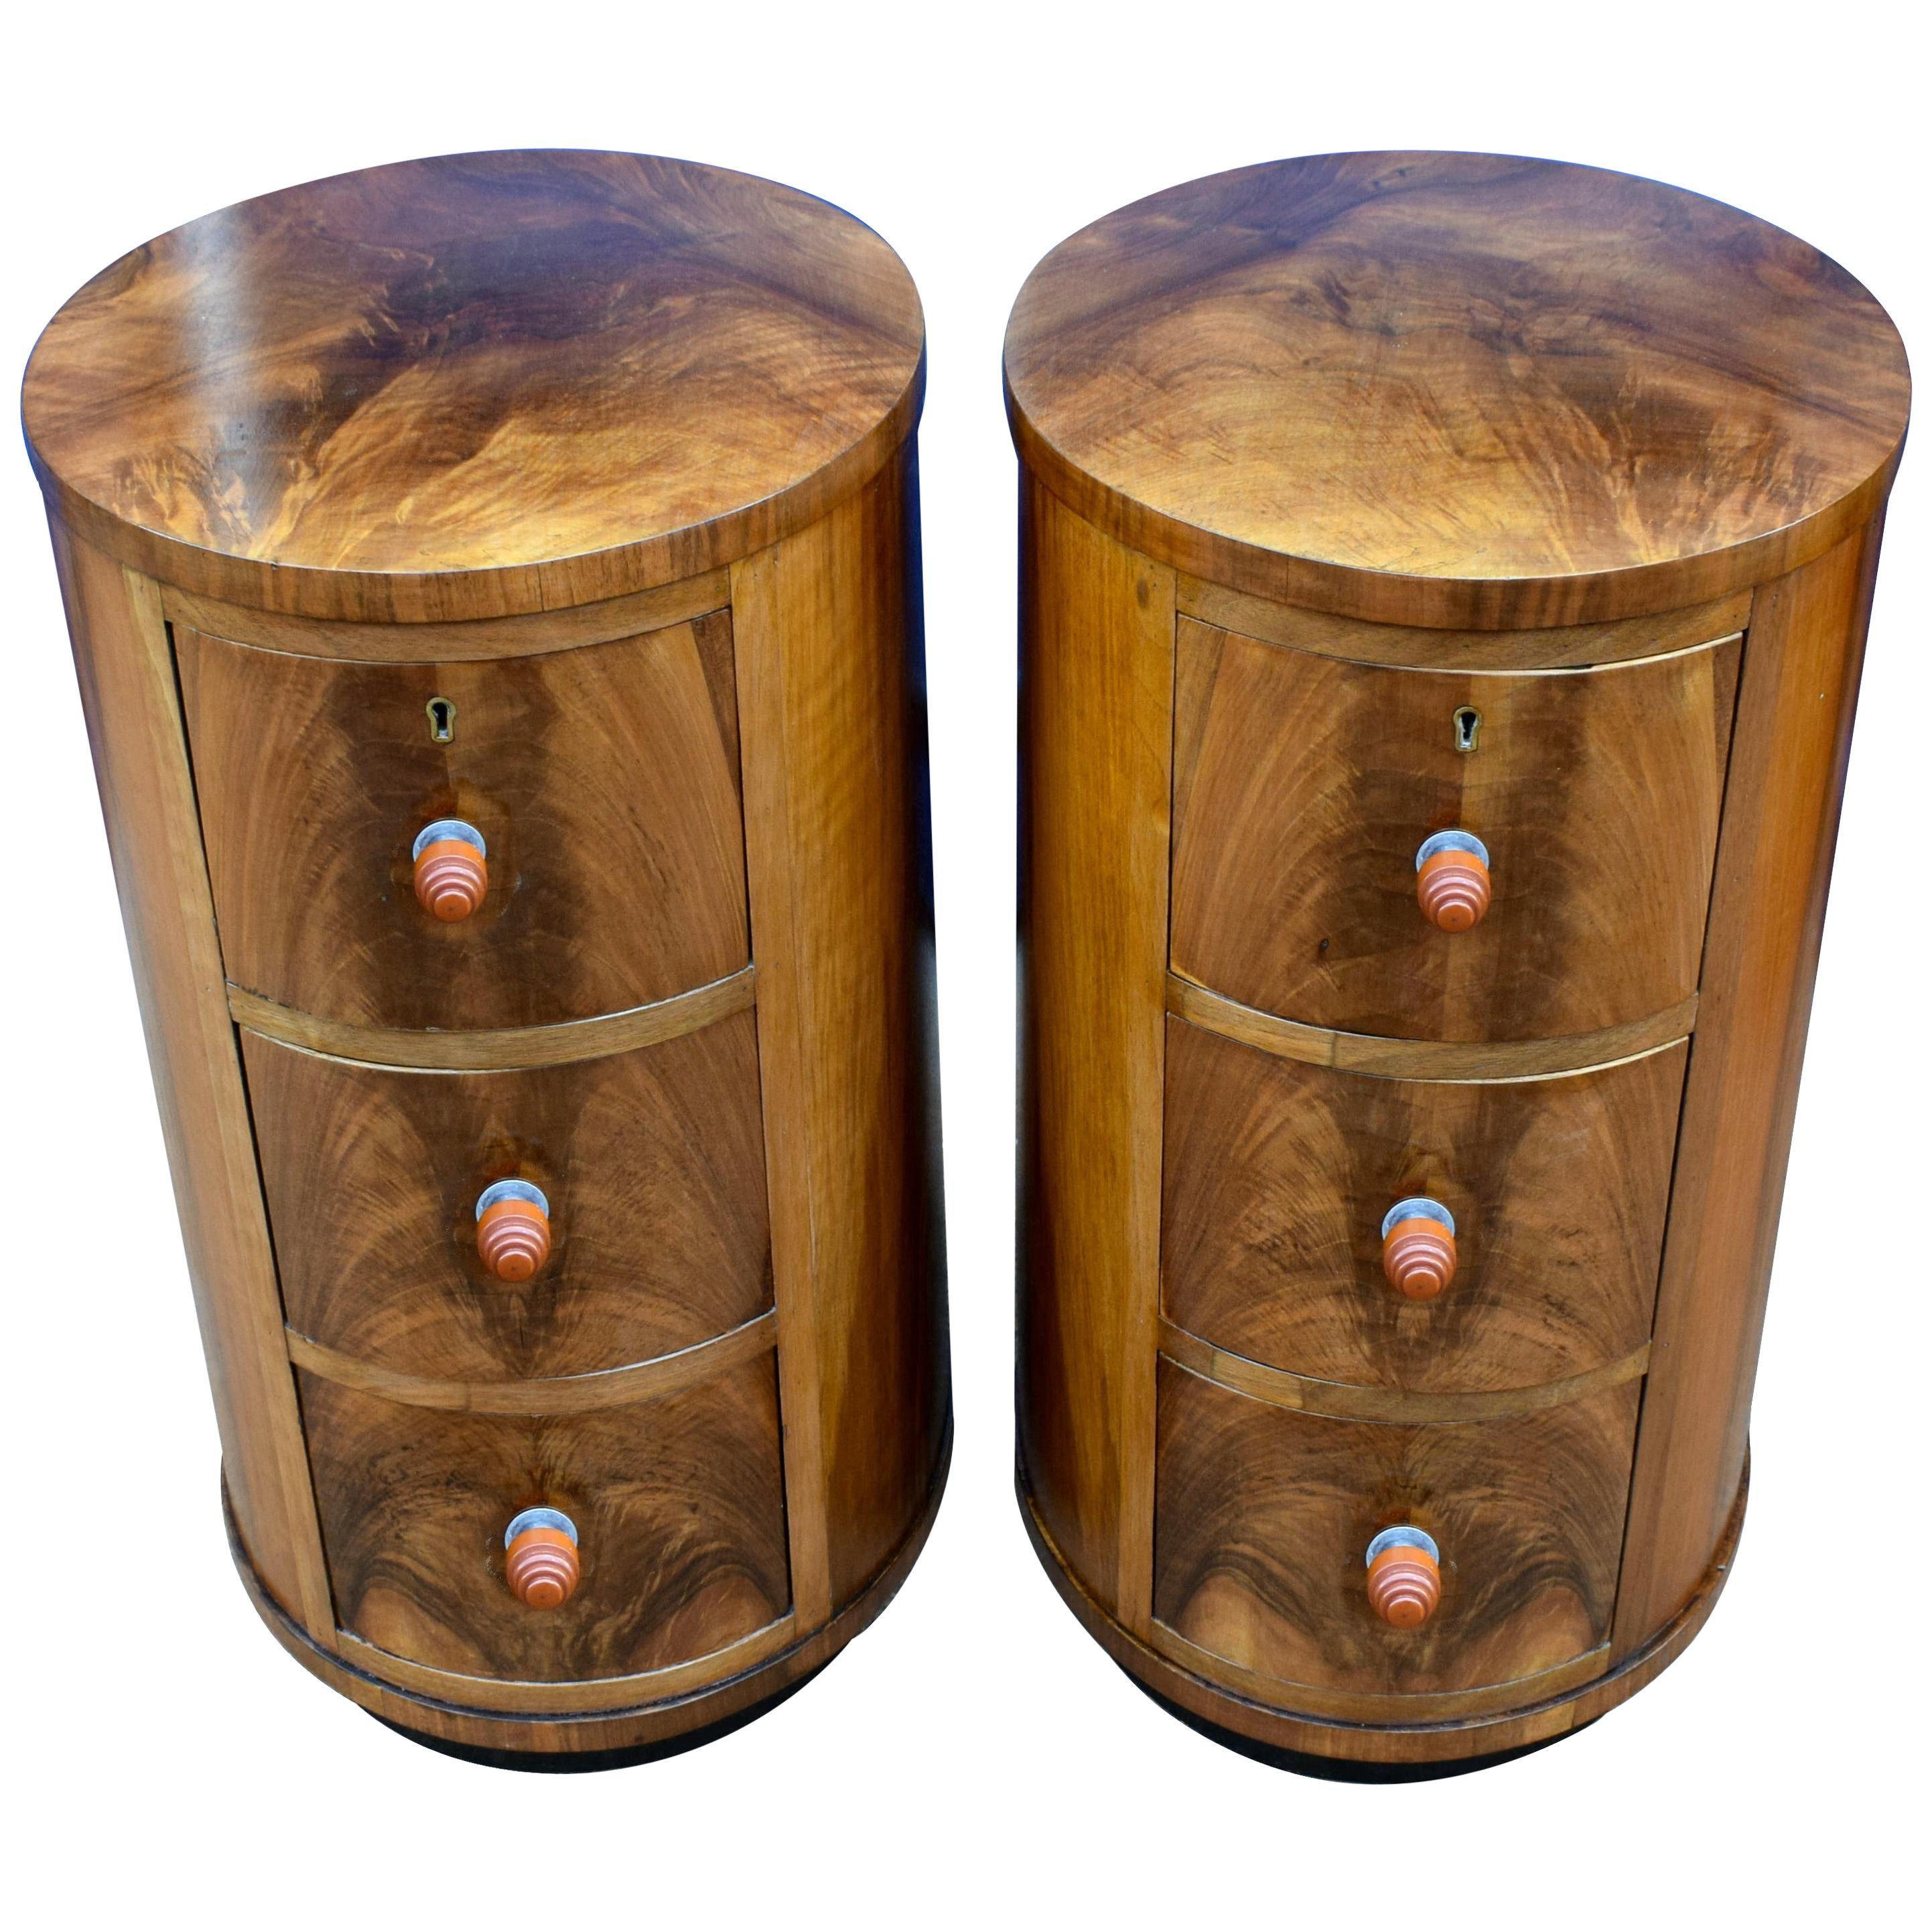 Matching Pair of Art Deco Oval Shaped Bedside Cabinet Tables, circa 1930